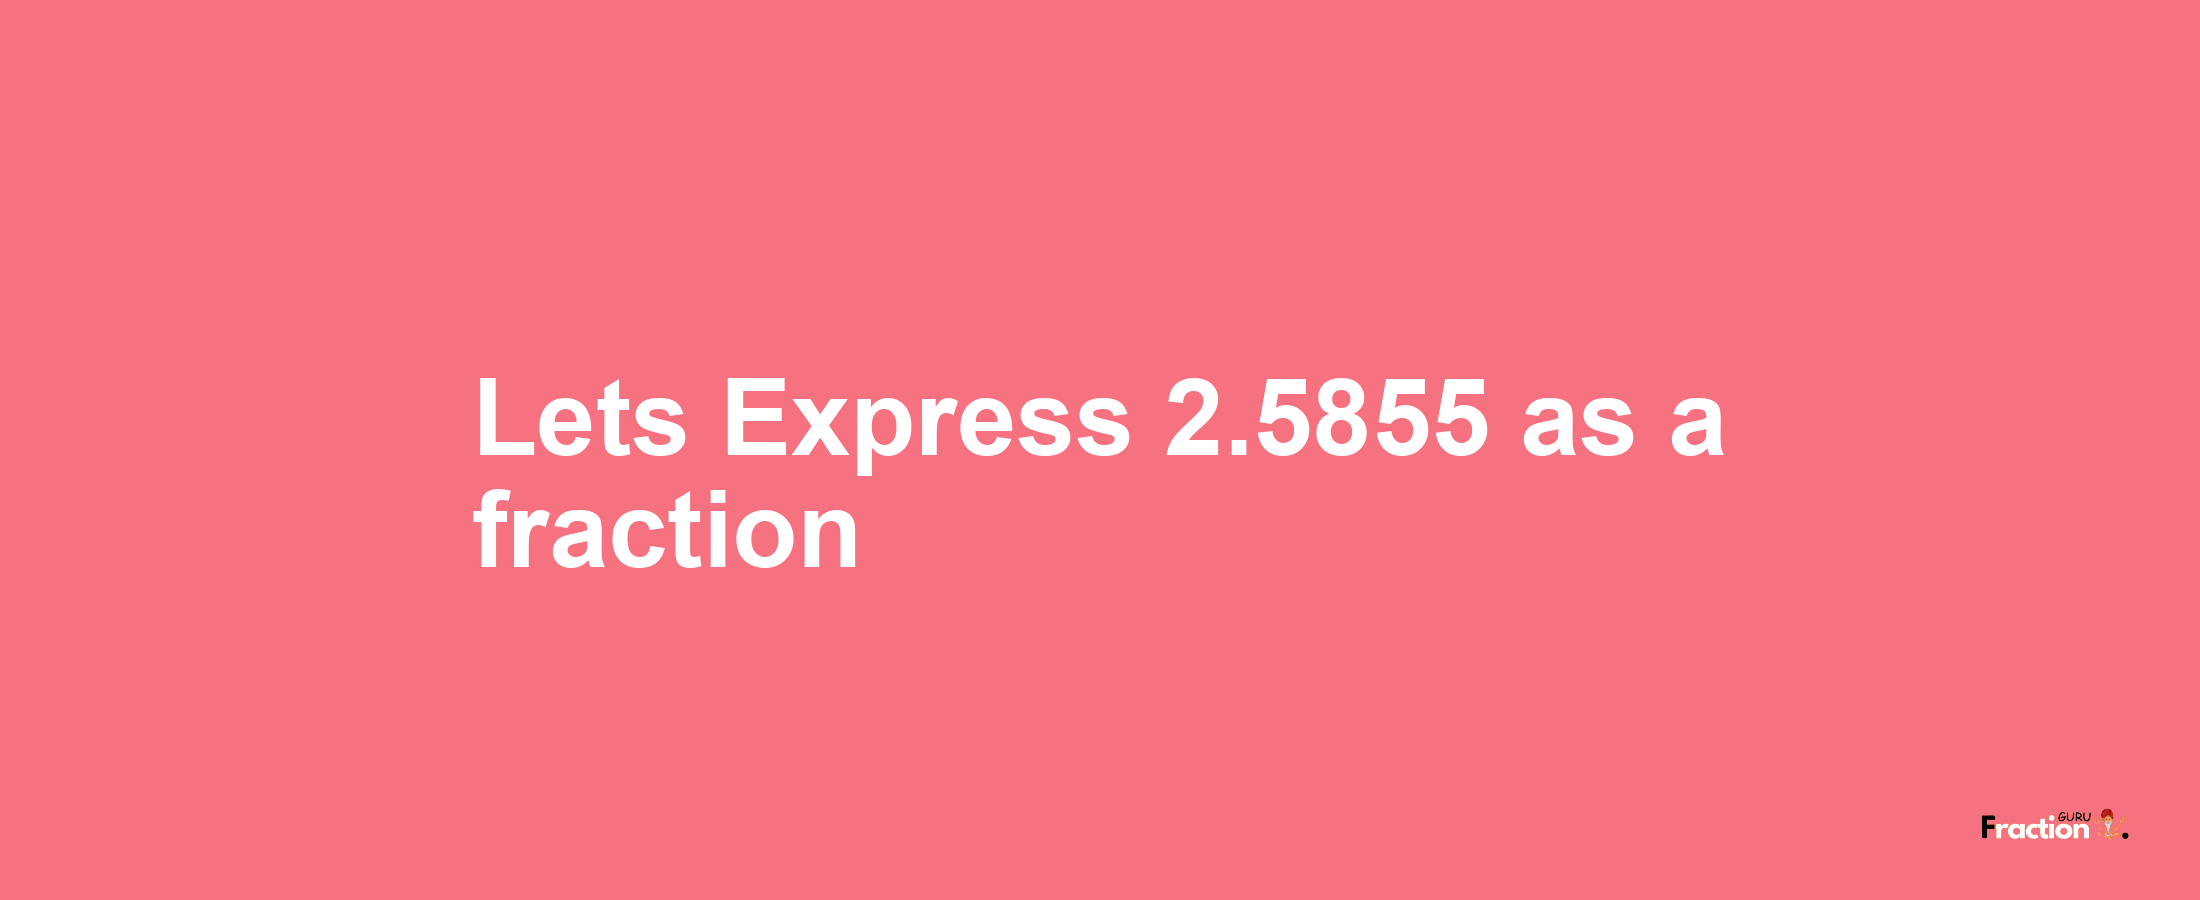 Lets Express 2.5855 as afraction